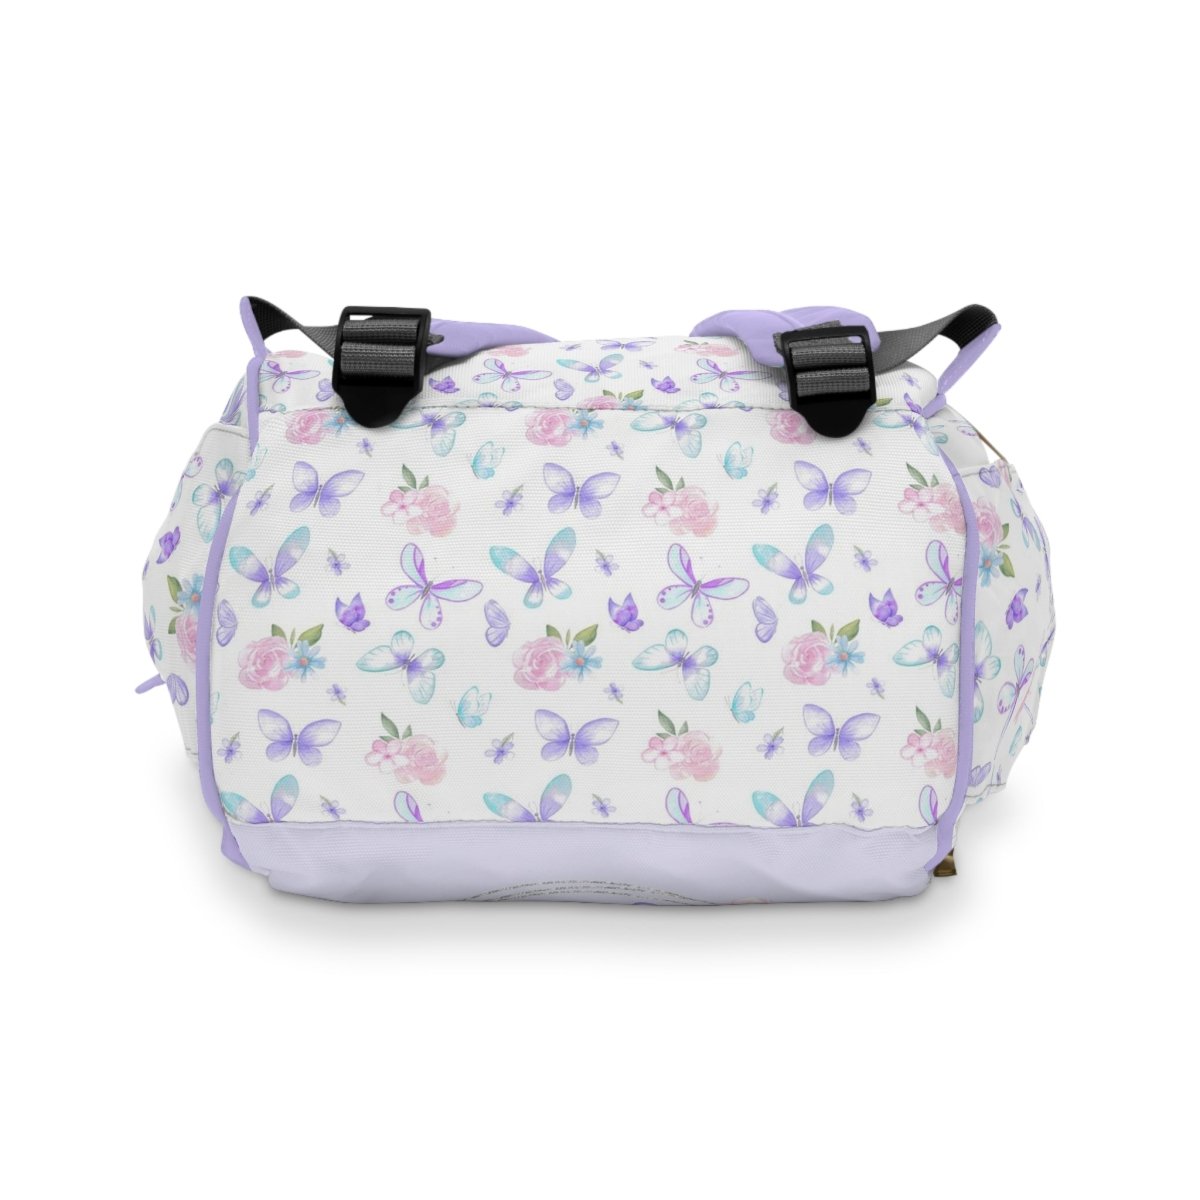 Butterfly Floral Personalized Backpack Diaper Bag - Butterfly Floral, gender_girl, text